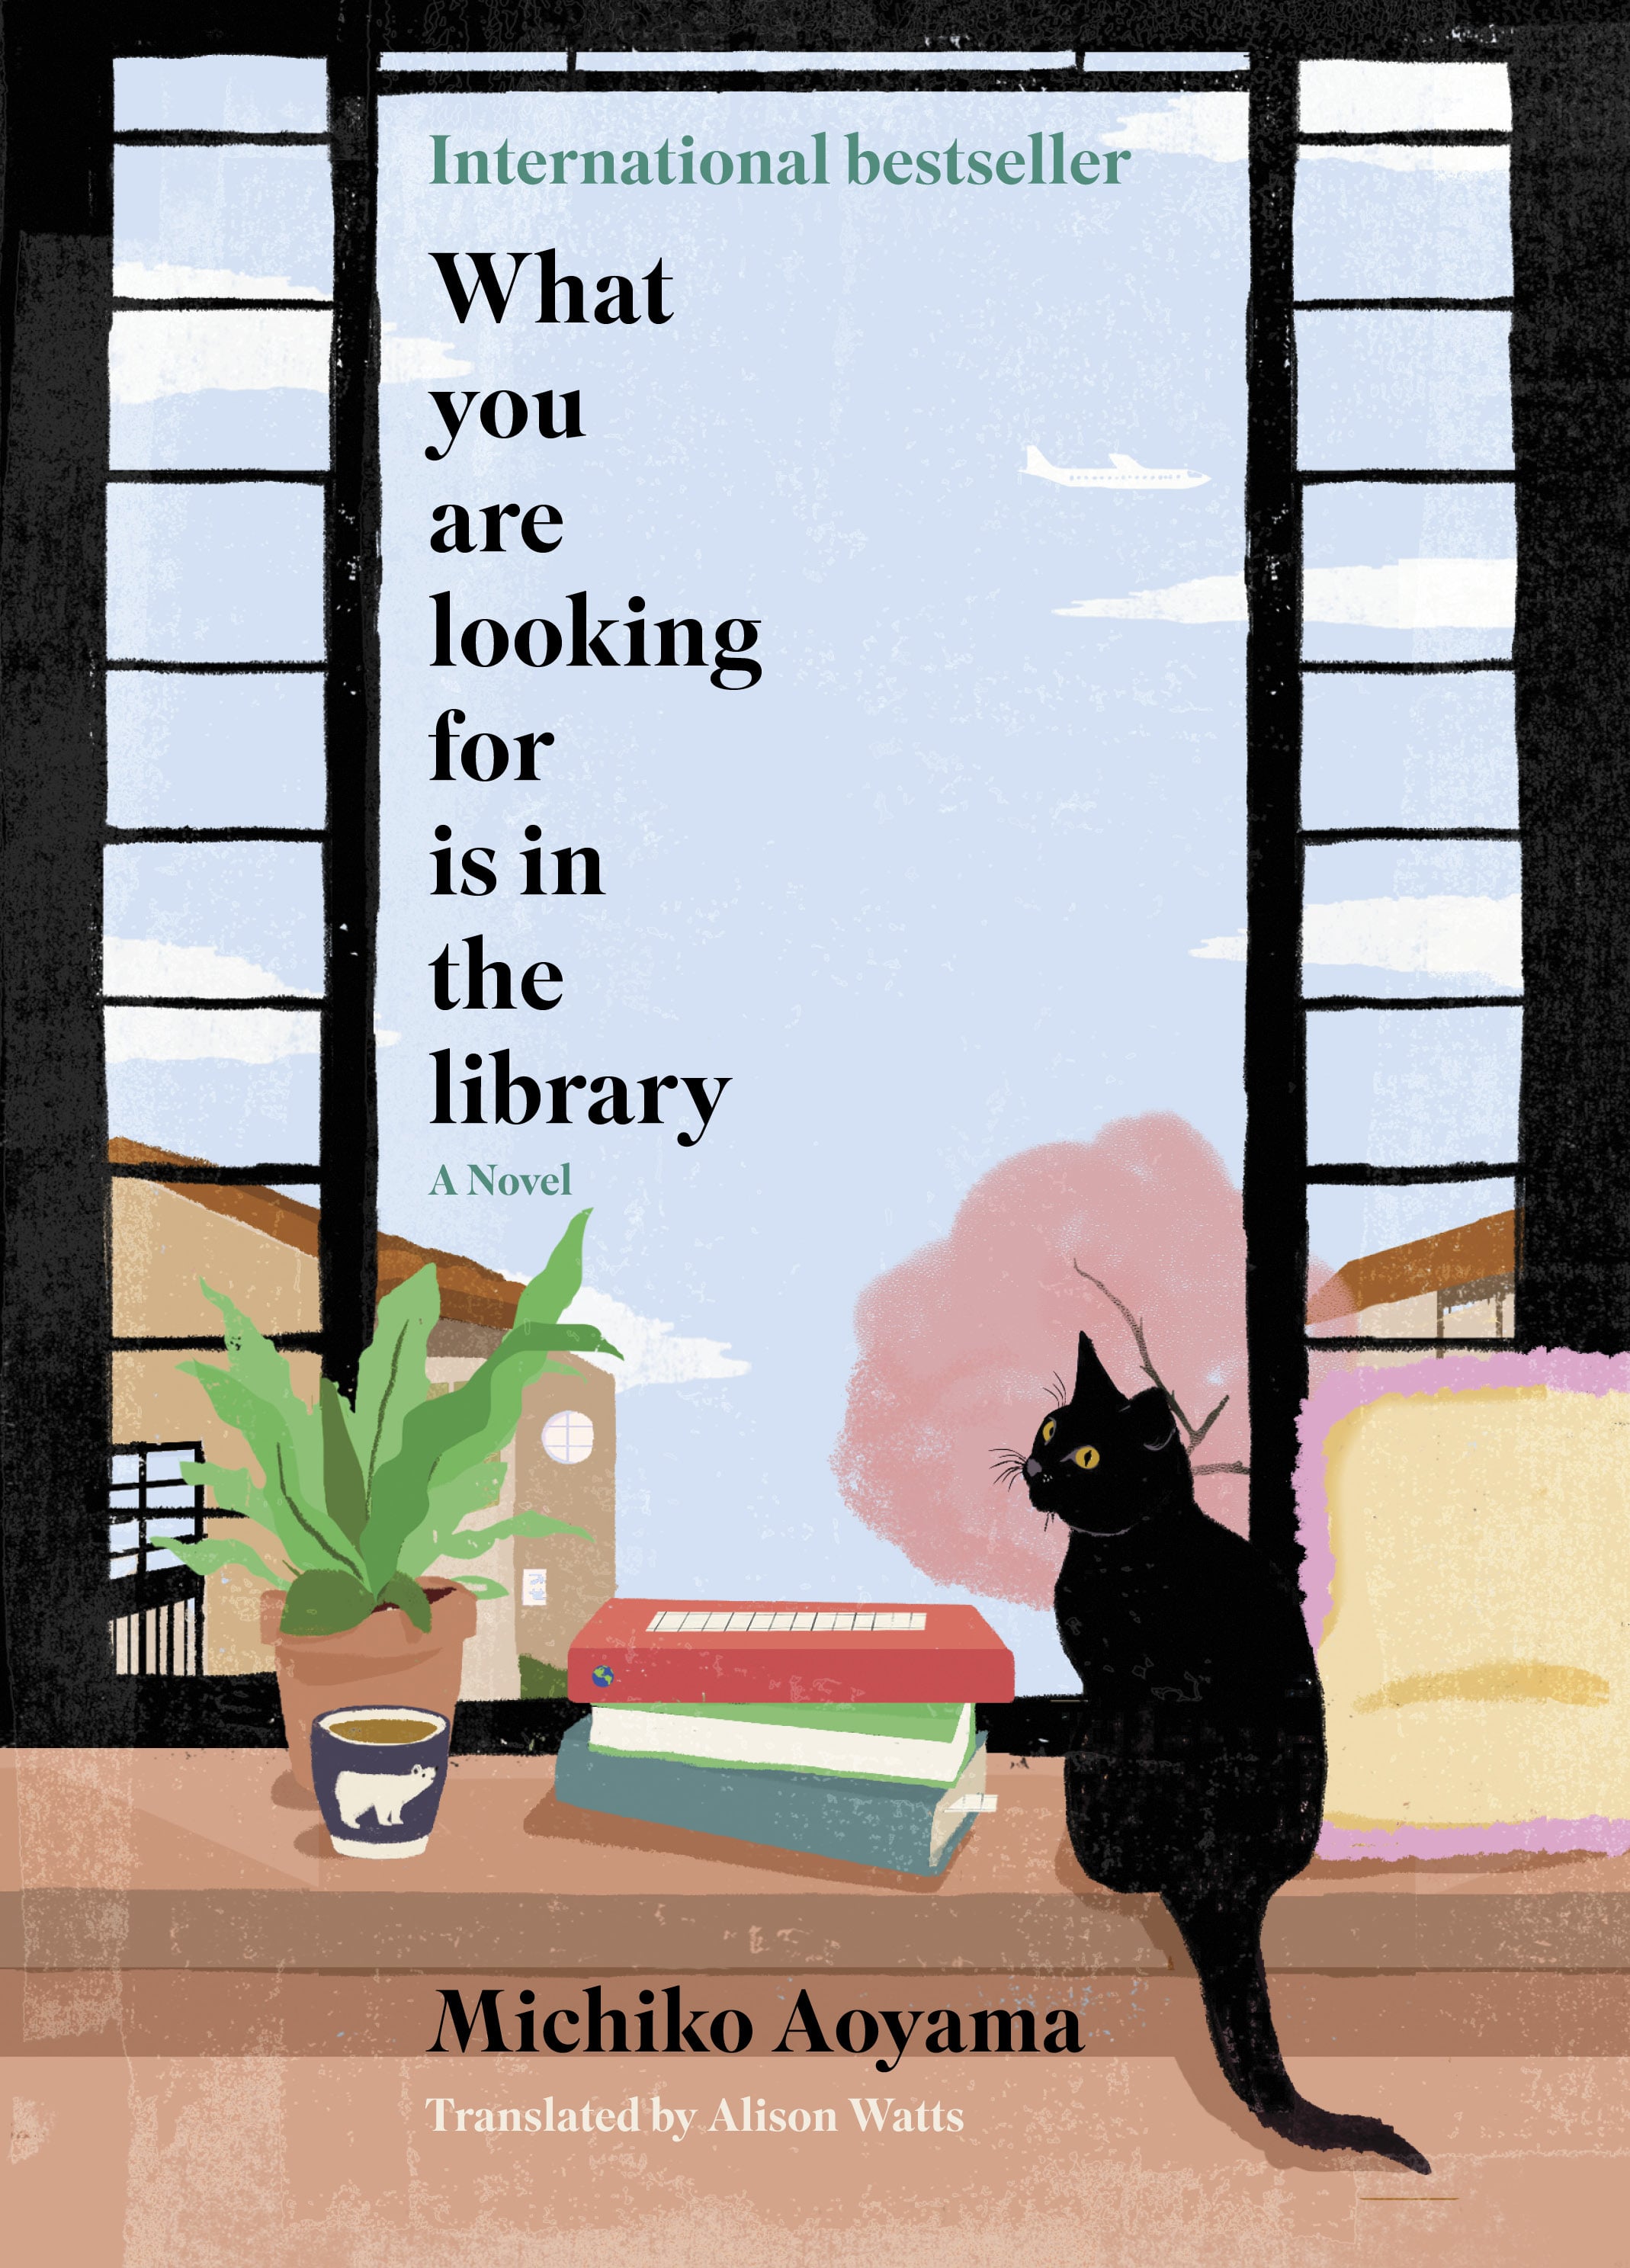 What you are looking for is in the library book cover with a cat looking out the window.